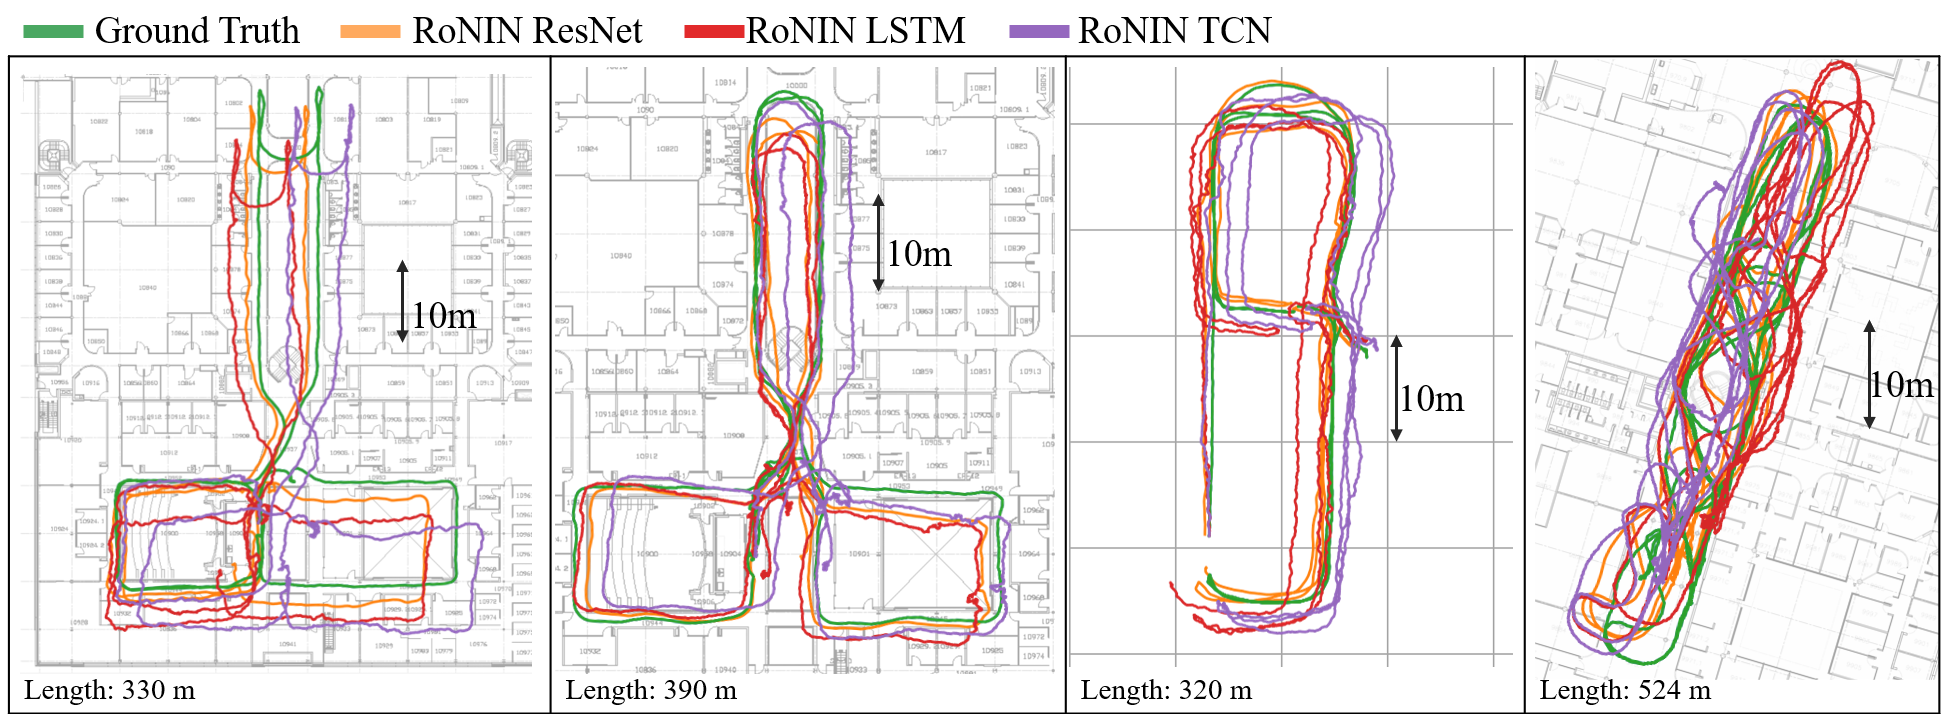 Position results from our method on RoNIN dataset